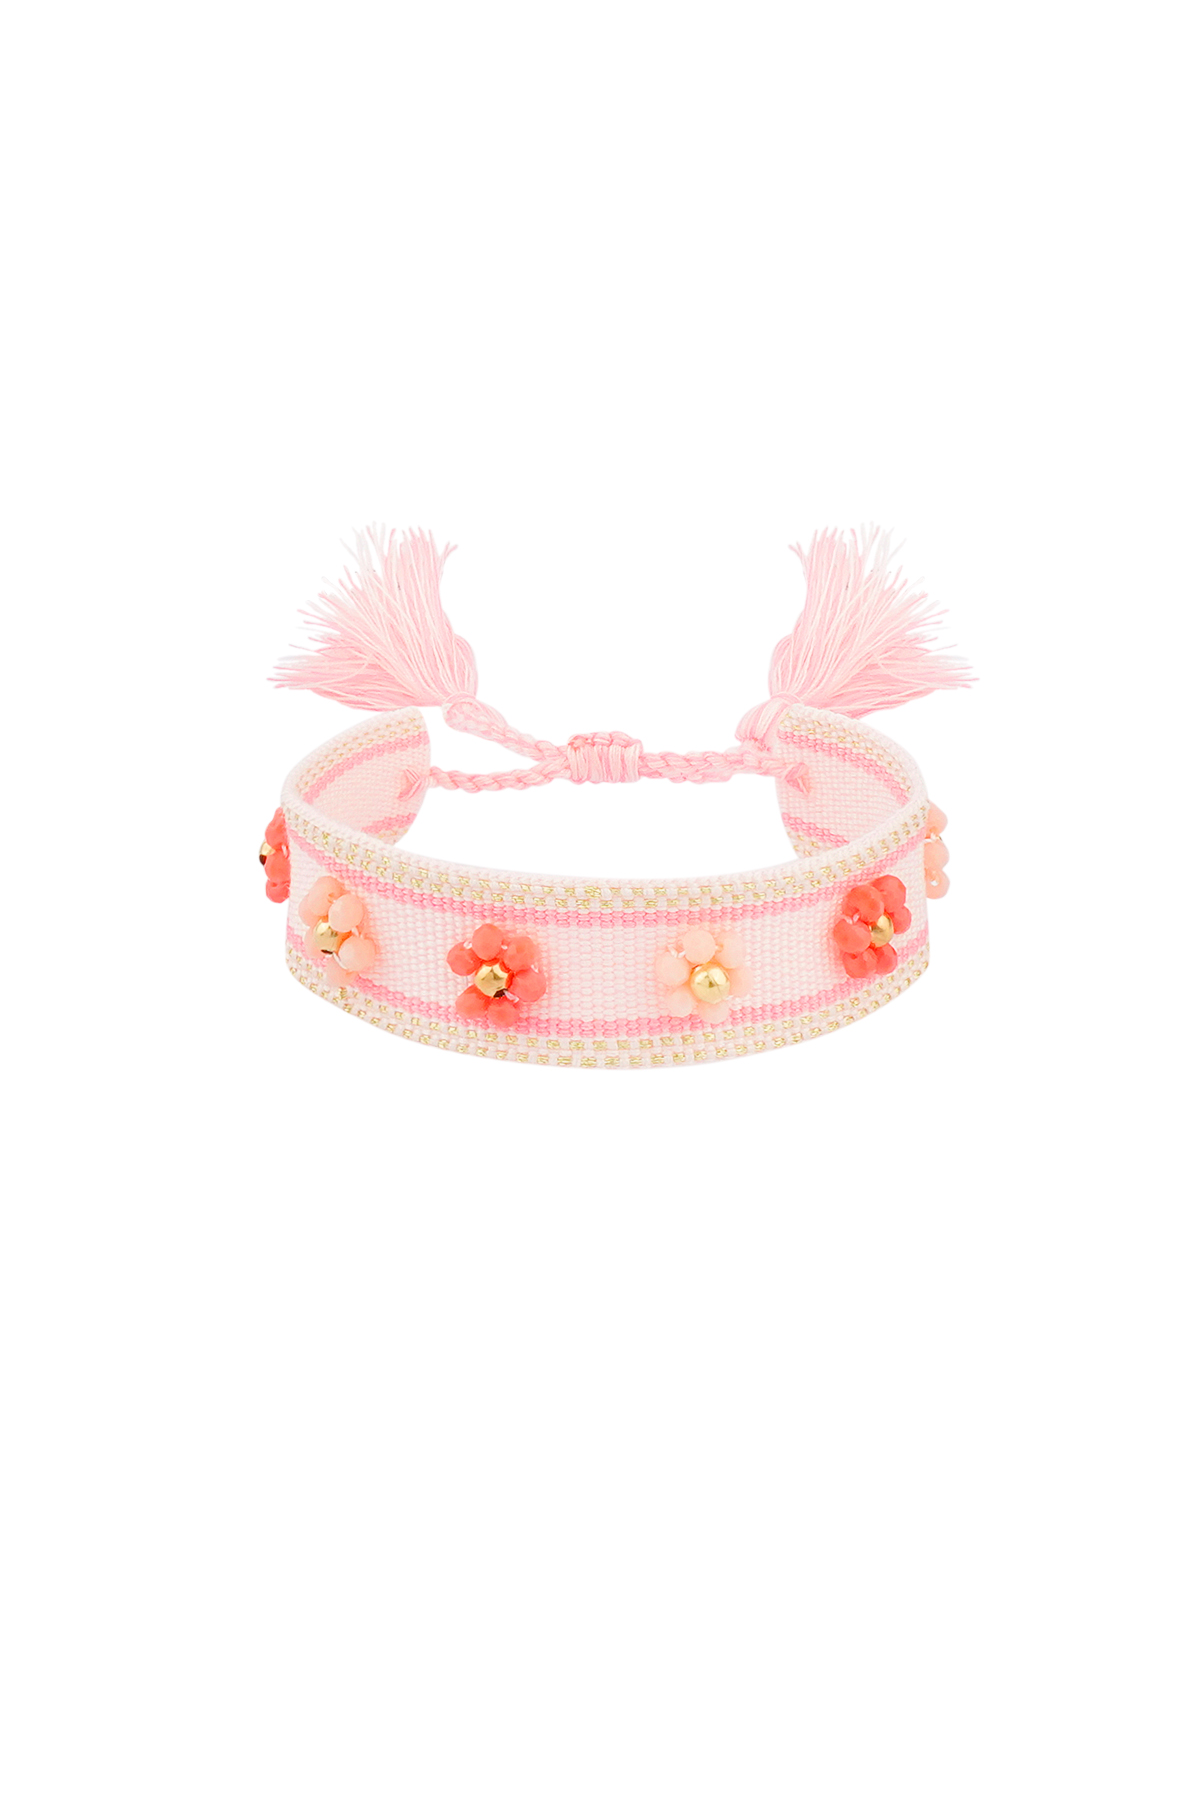 Fabric bracelet with flowers - pink